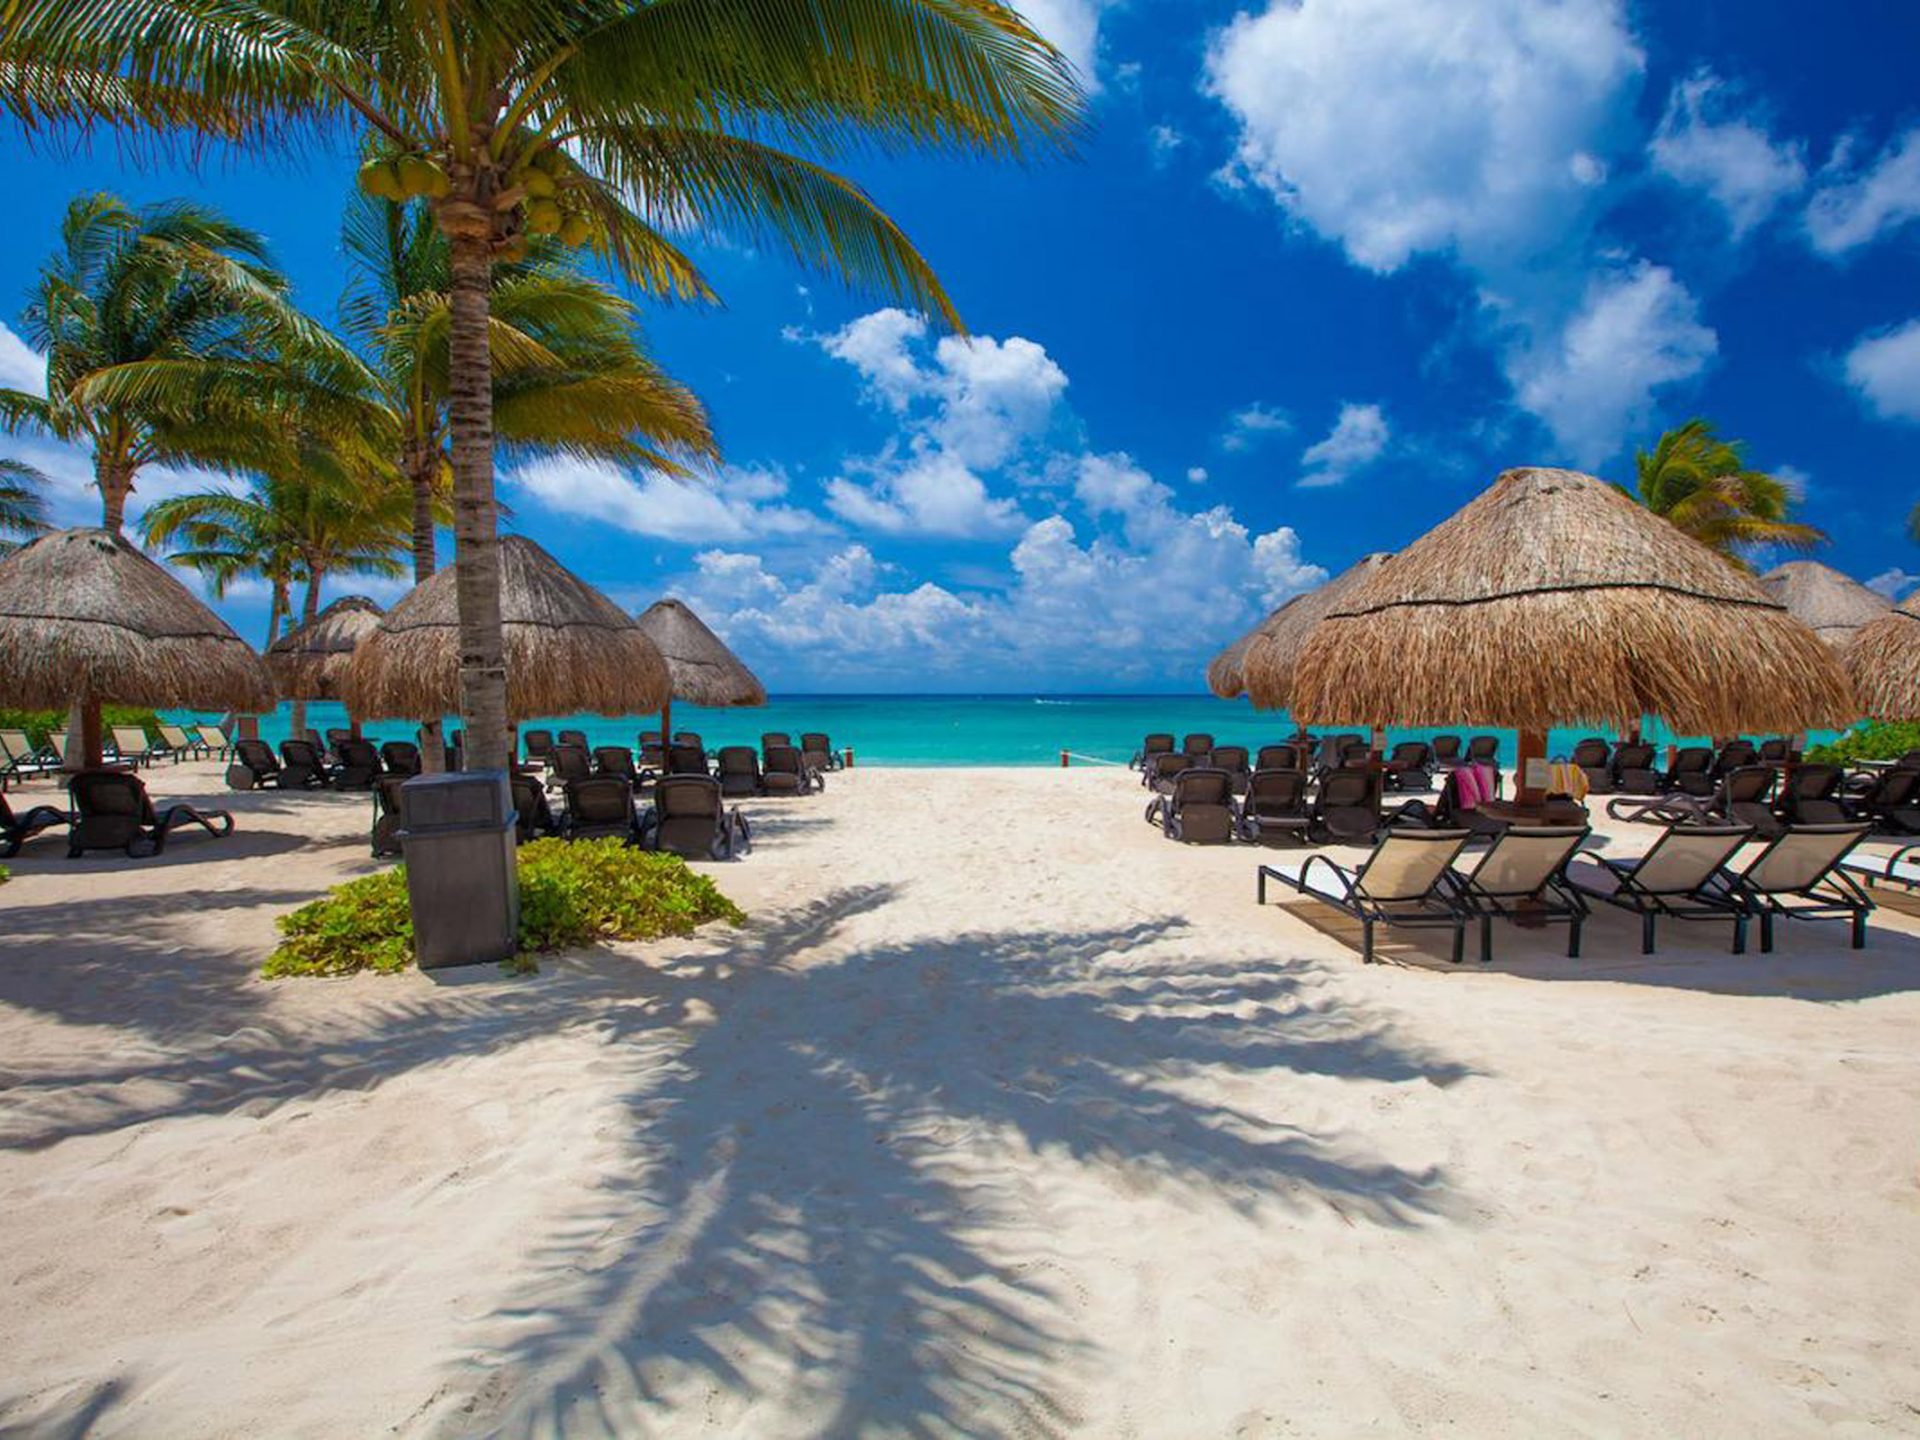 Playa Del Carmen Beach Is A City Located Along The